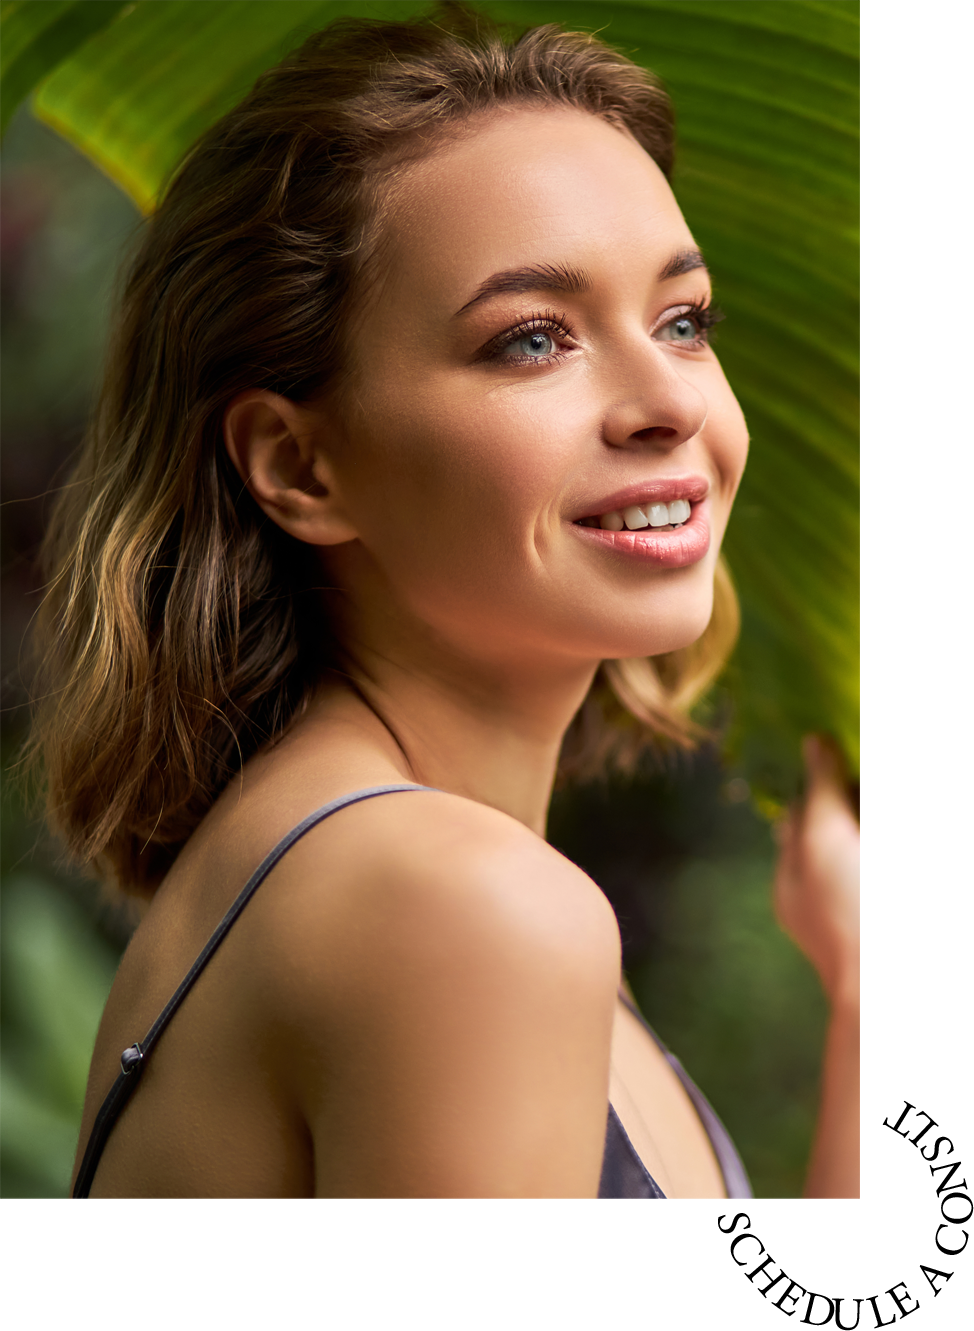 lady with natural nude makeup, perfect skin, hiding behind palm leaves, woman enjoys being in nature. cosmetic, wellness, purity, skincare, spa concept.